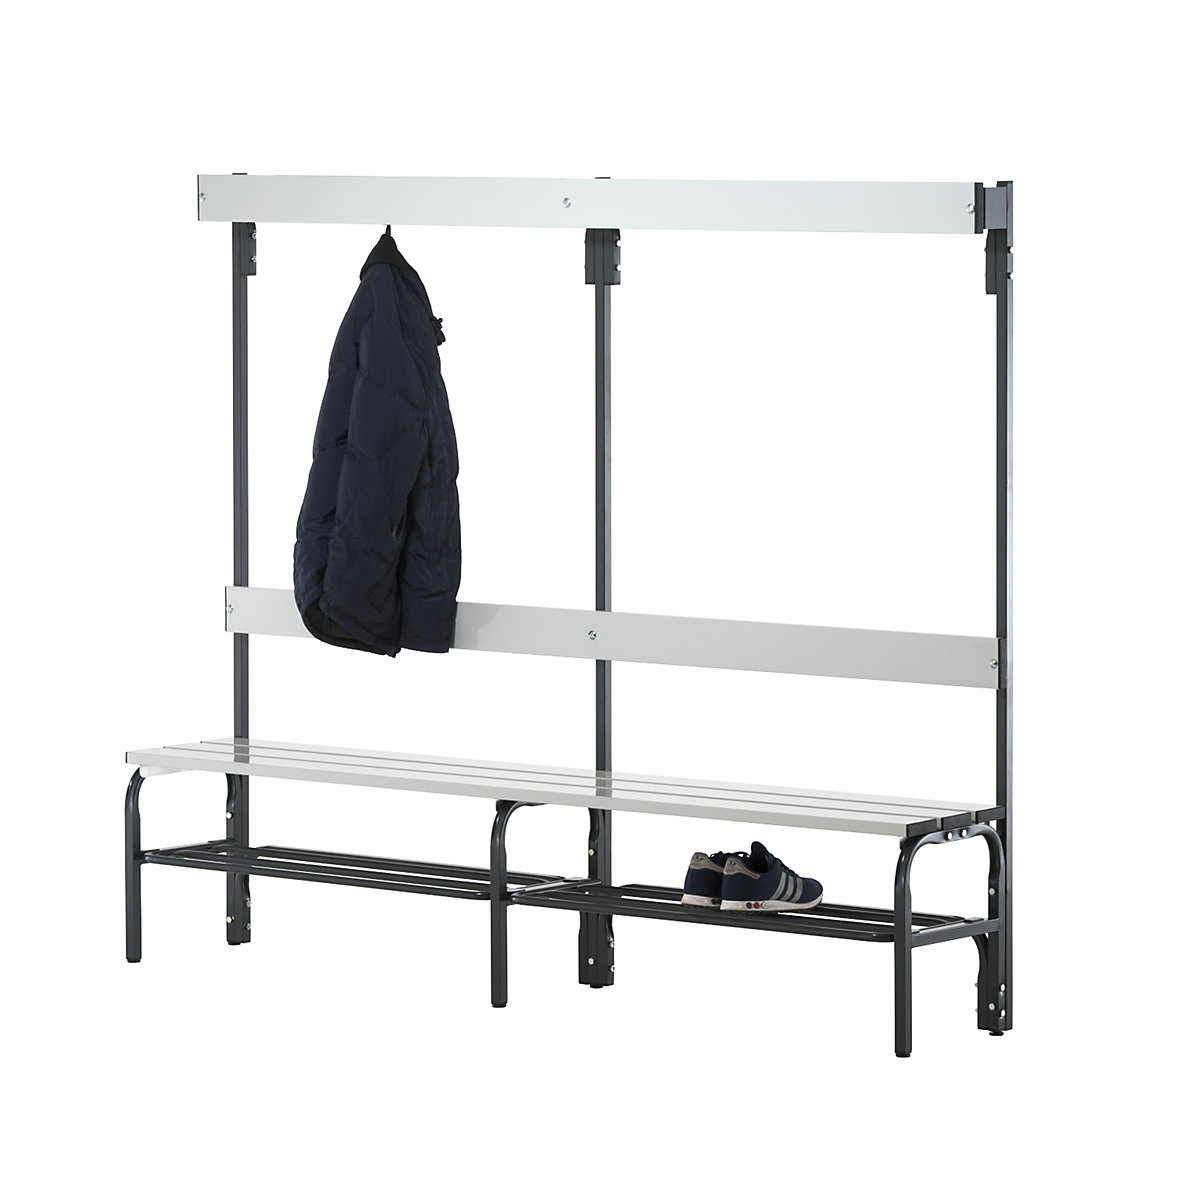 Sypro – Changing room bench with aluminium slats, HxD 1650 x 375 mm, single sided, length 2000 mm, 6 hooks, charcoal, shoe rack